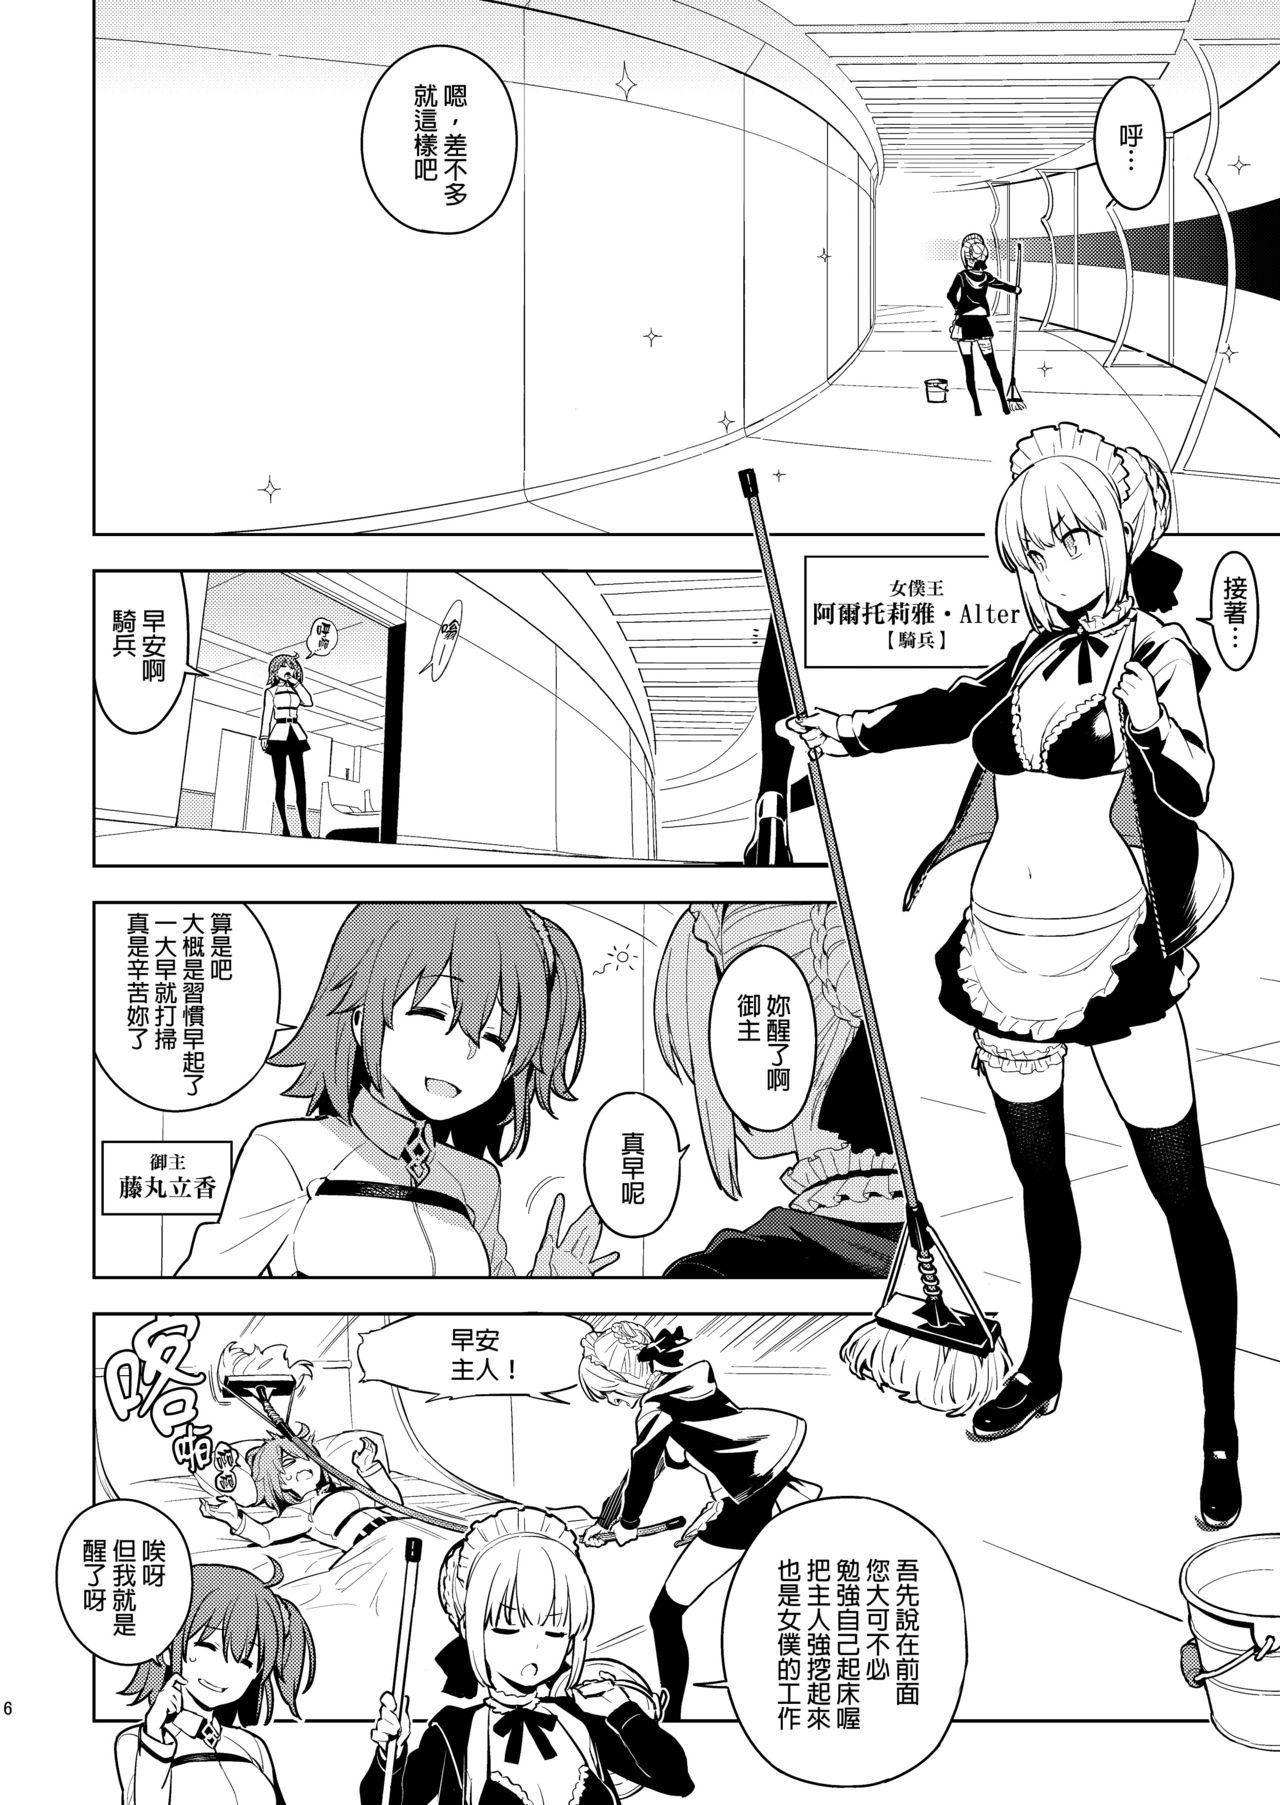 Hot Women Having Sex DELUSION - Fate grand order Safadinha - Page 5